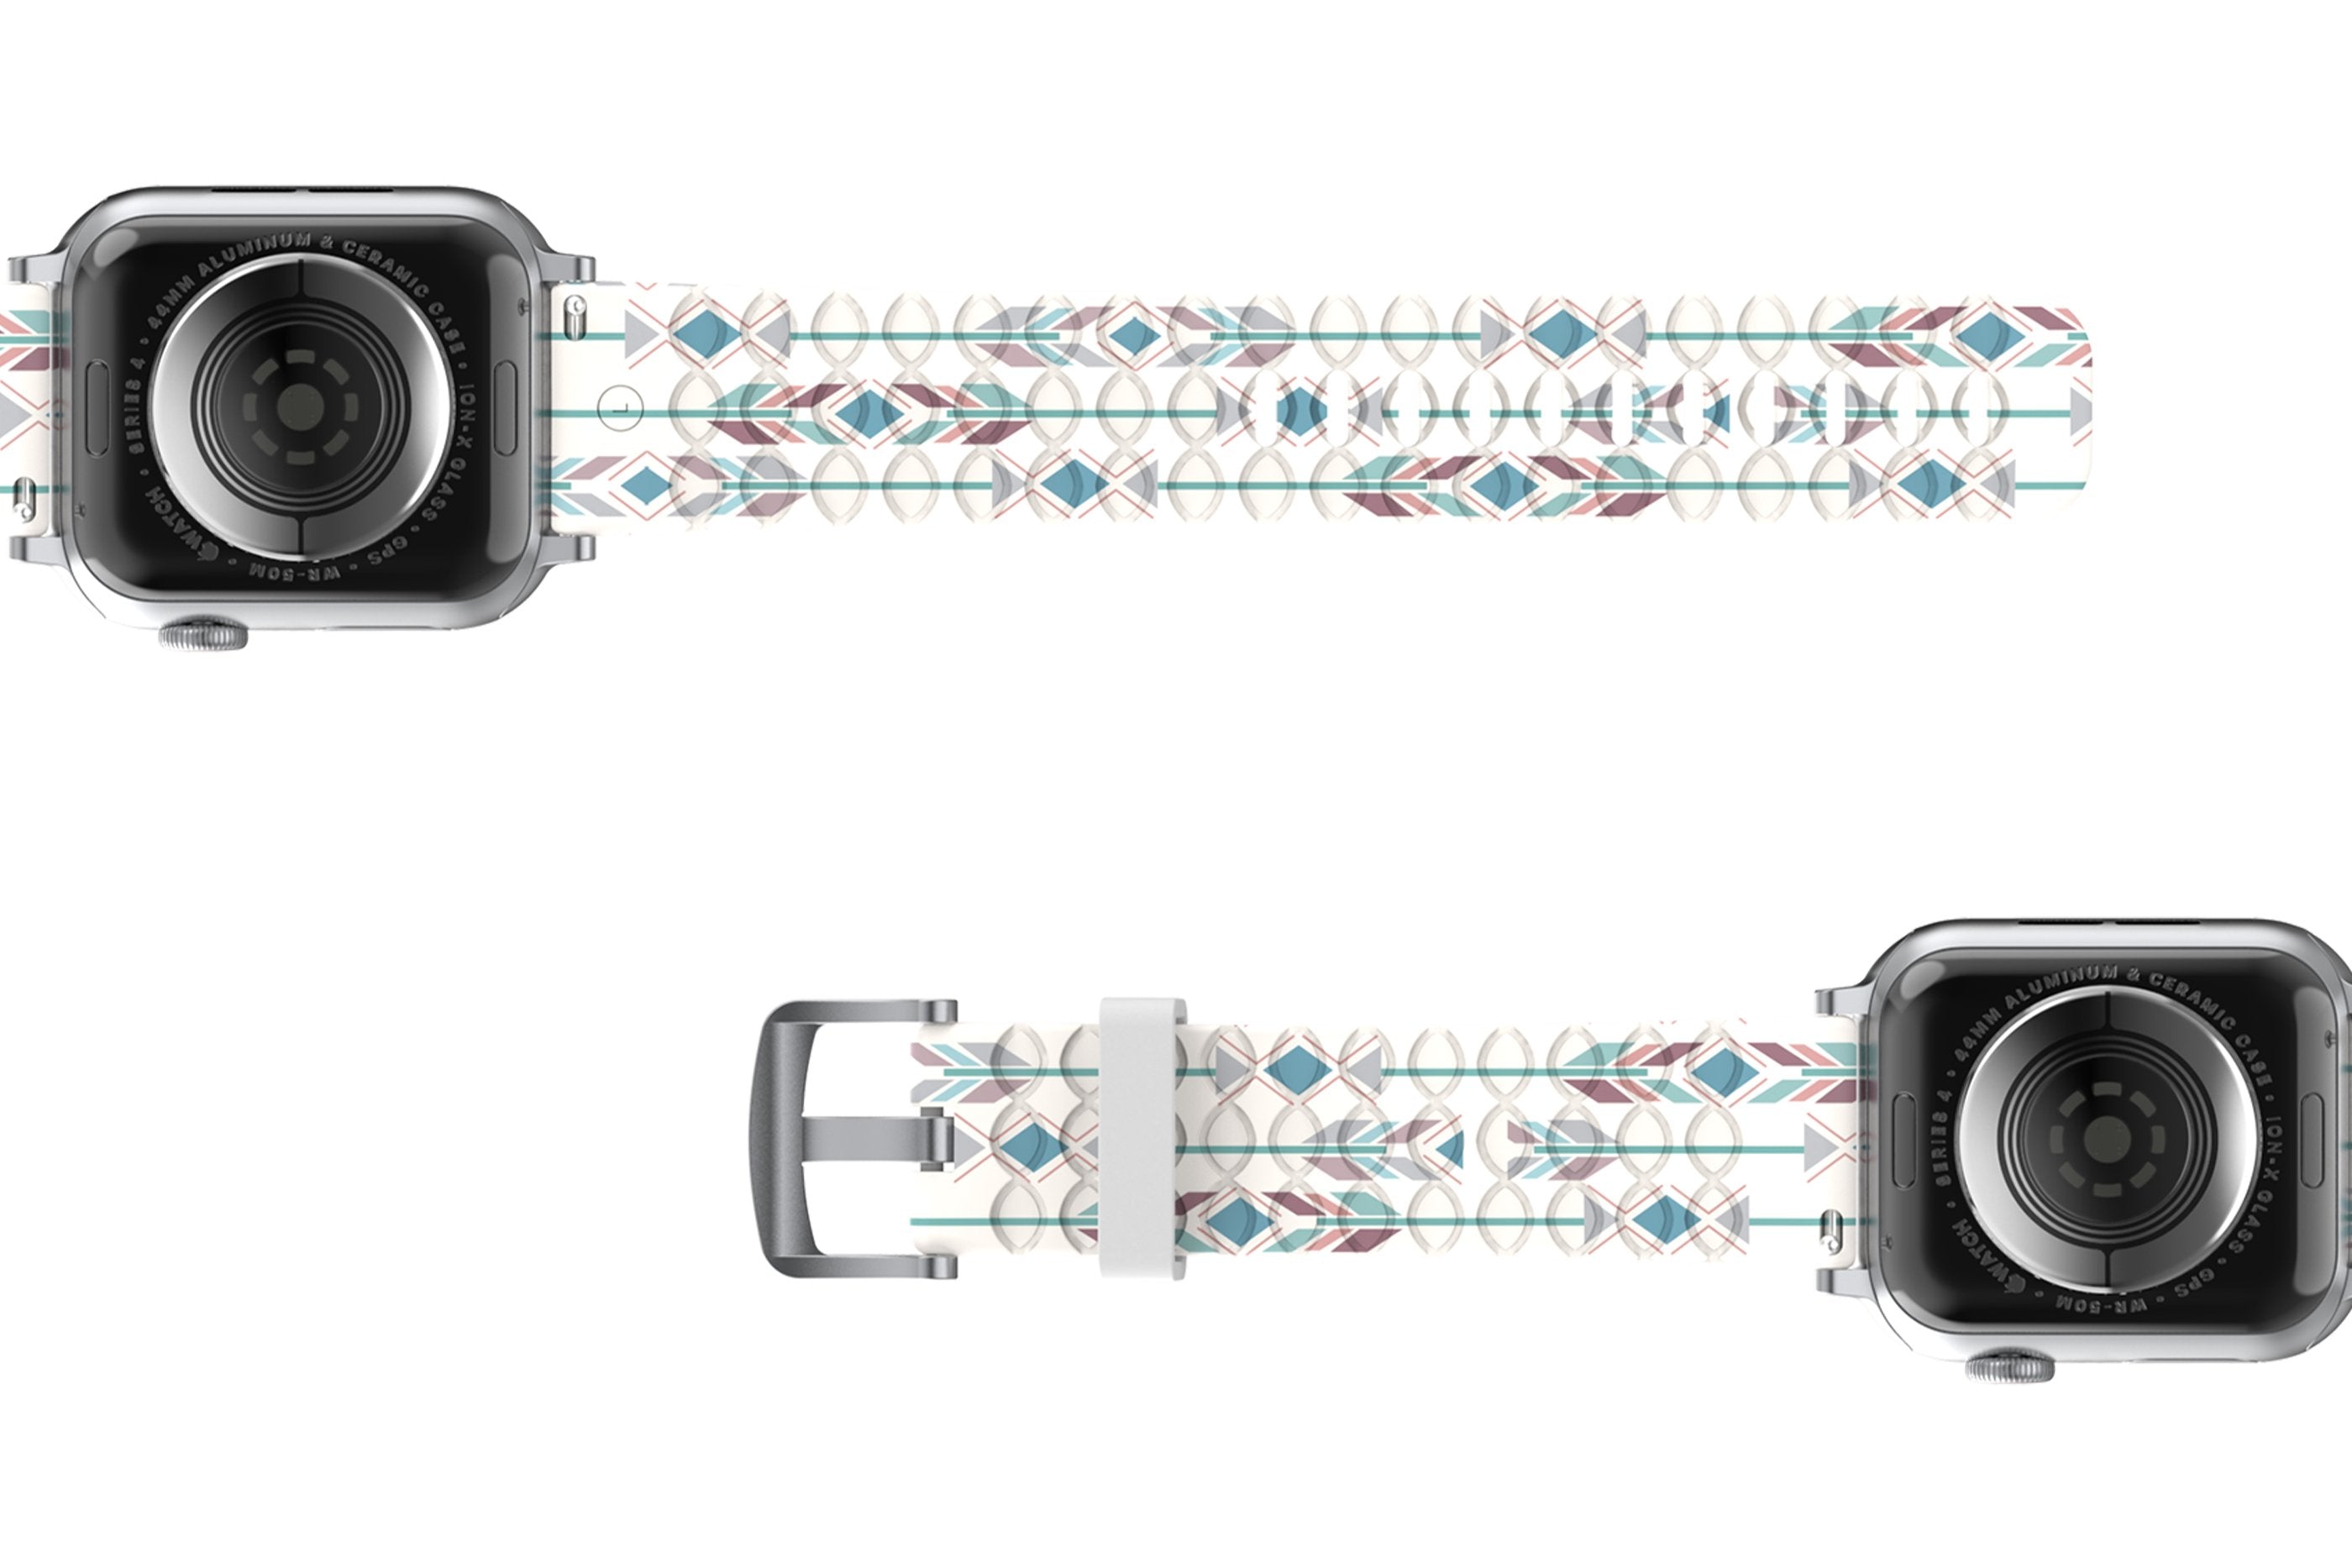 Wanderlust - Apple watch band with silver hardware viewed bottom up 